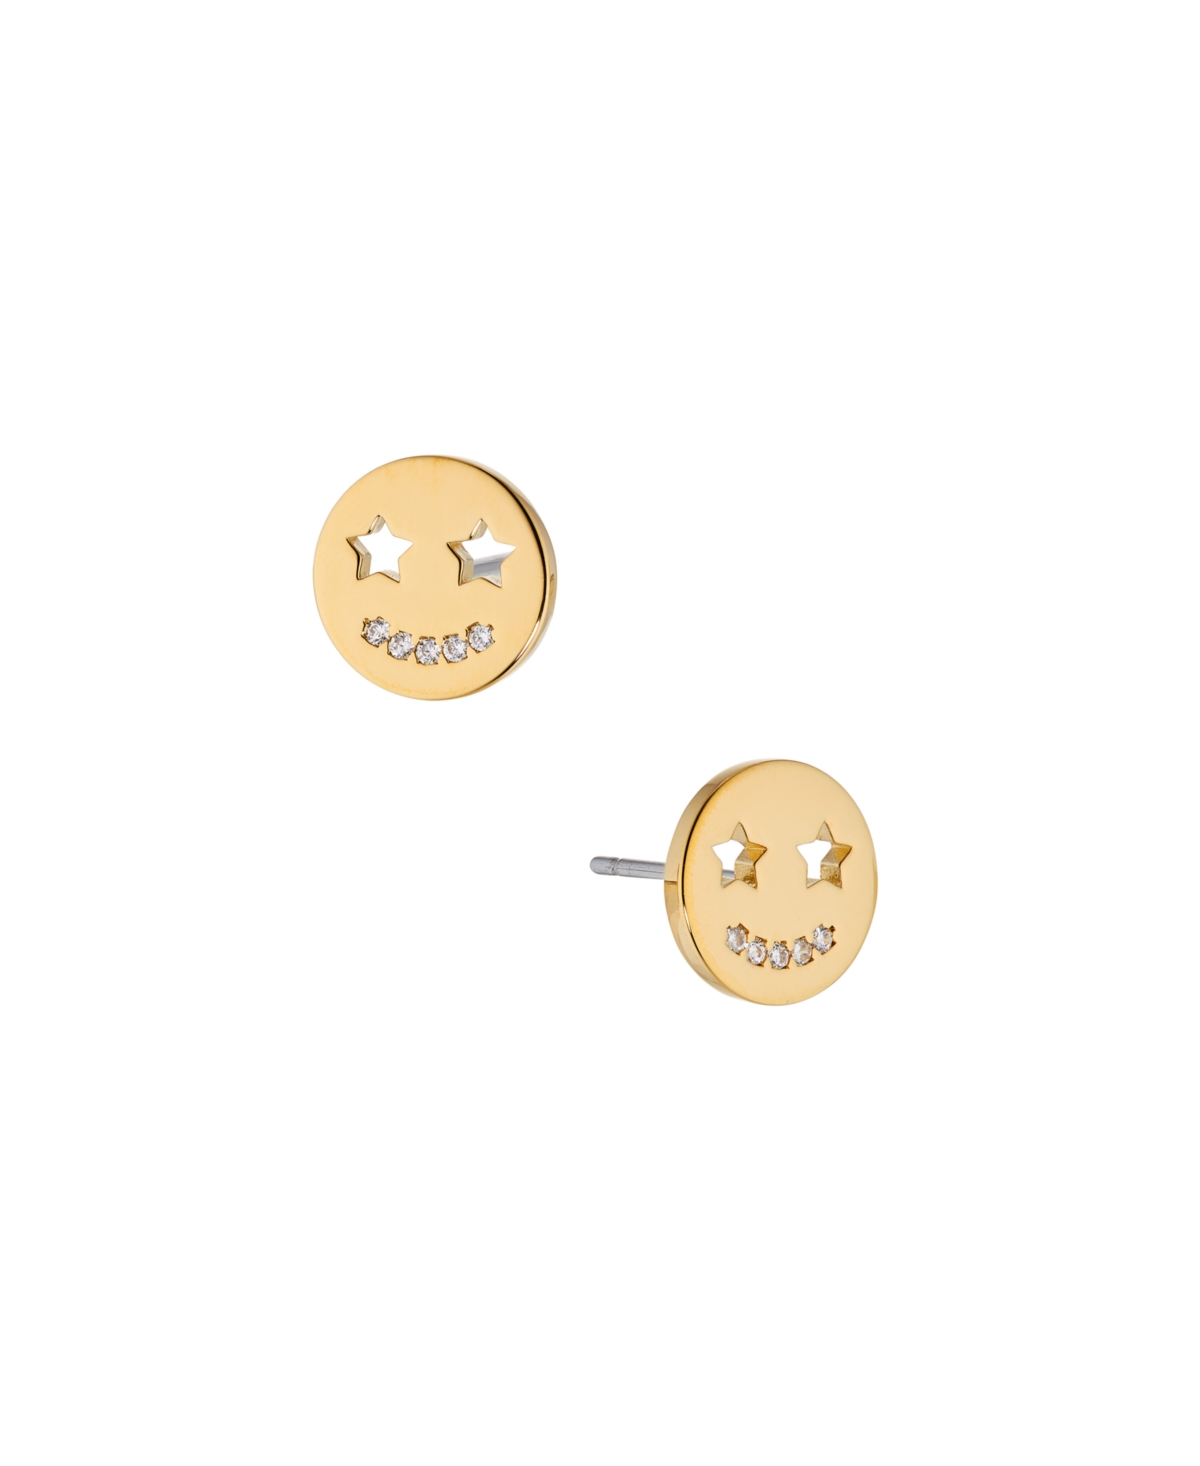 Smiley Face Stud Earring in 18K Gold Plated Brass - K Gold Plated